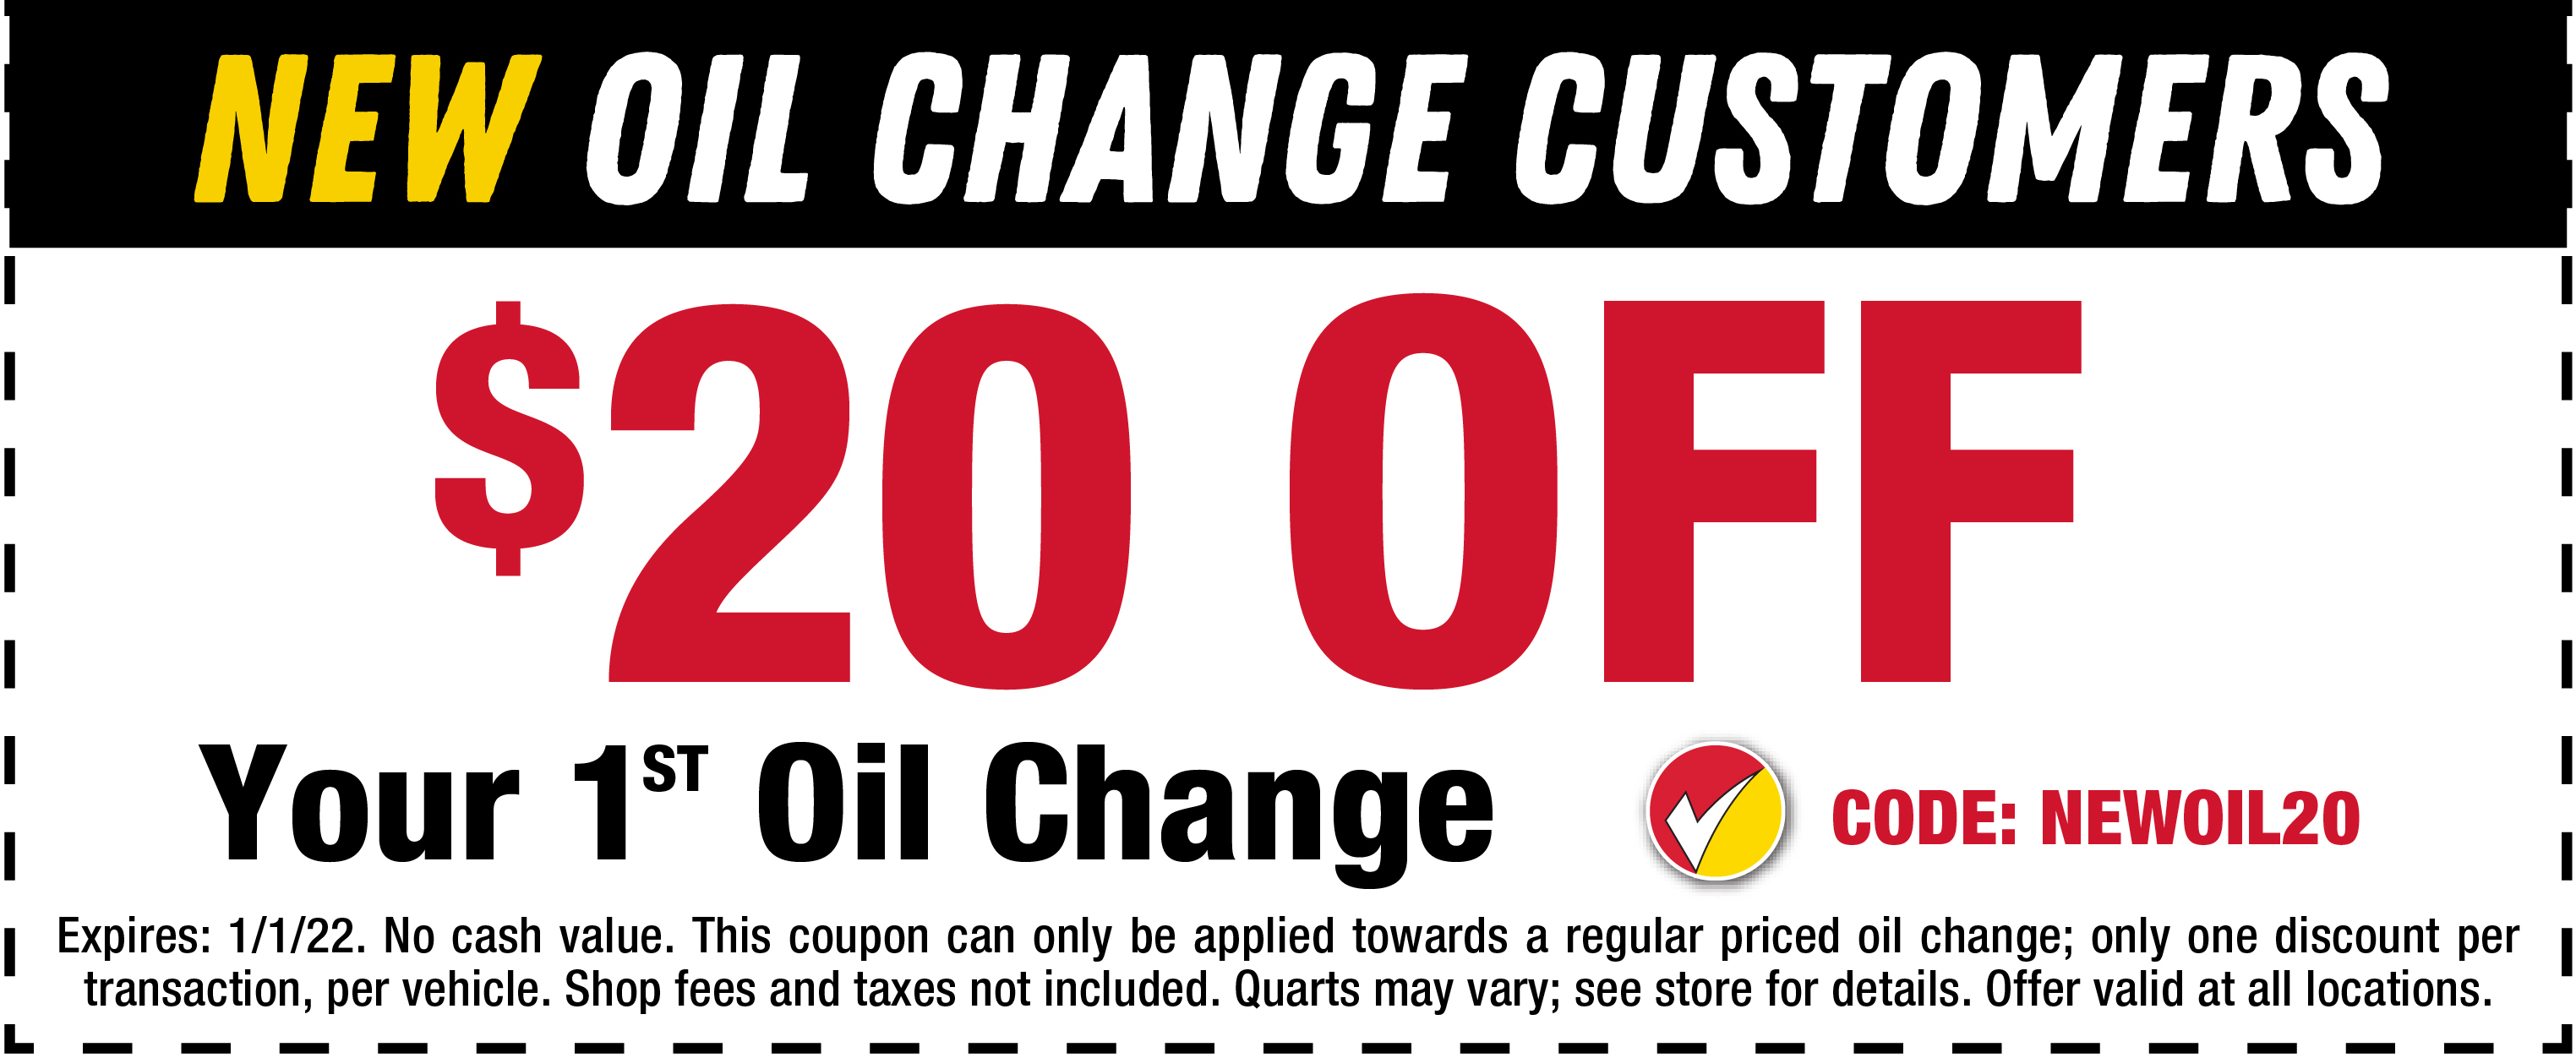 50% off every other oil change